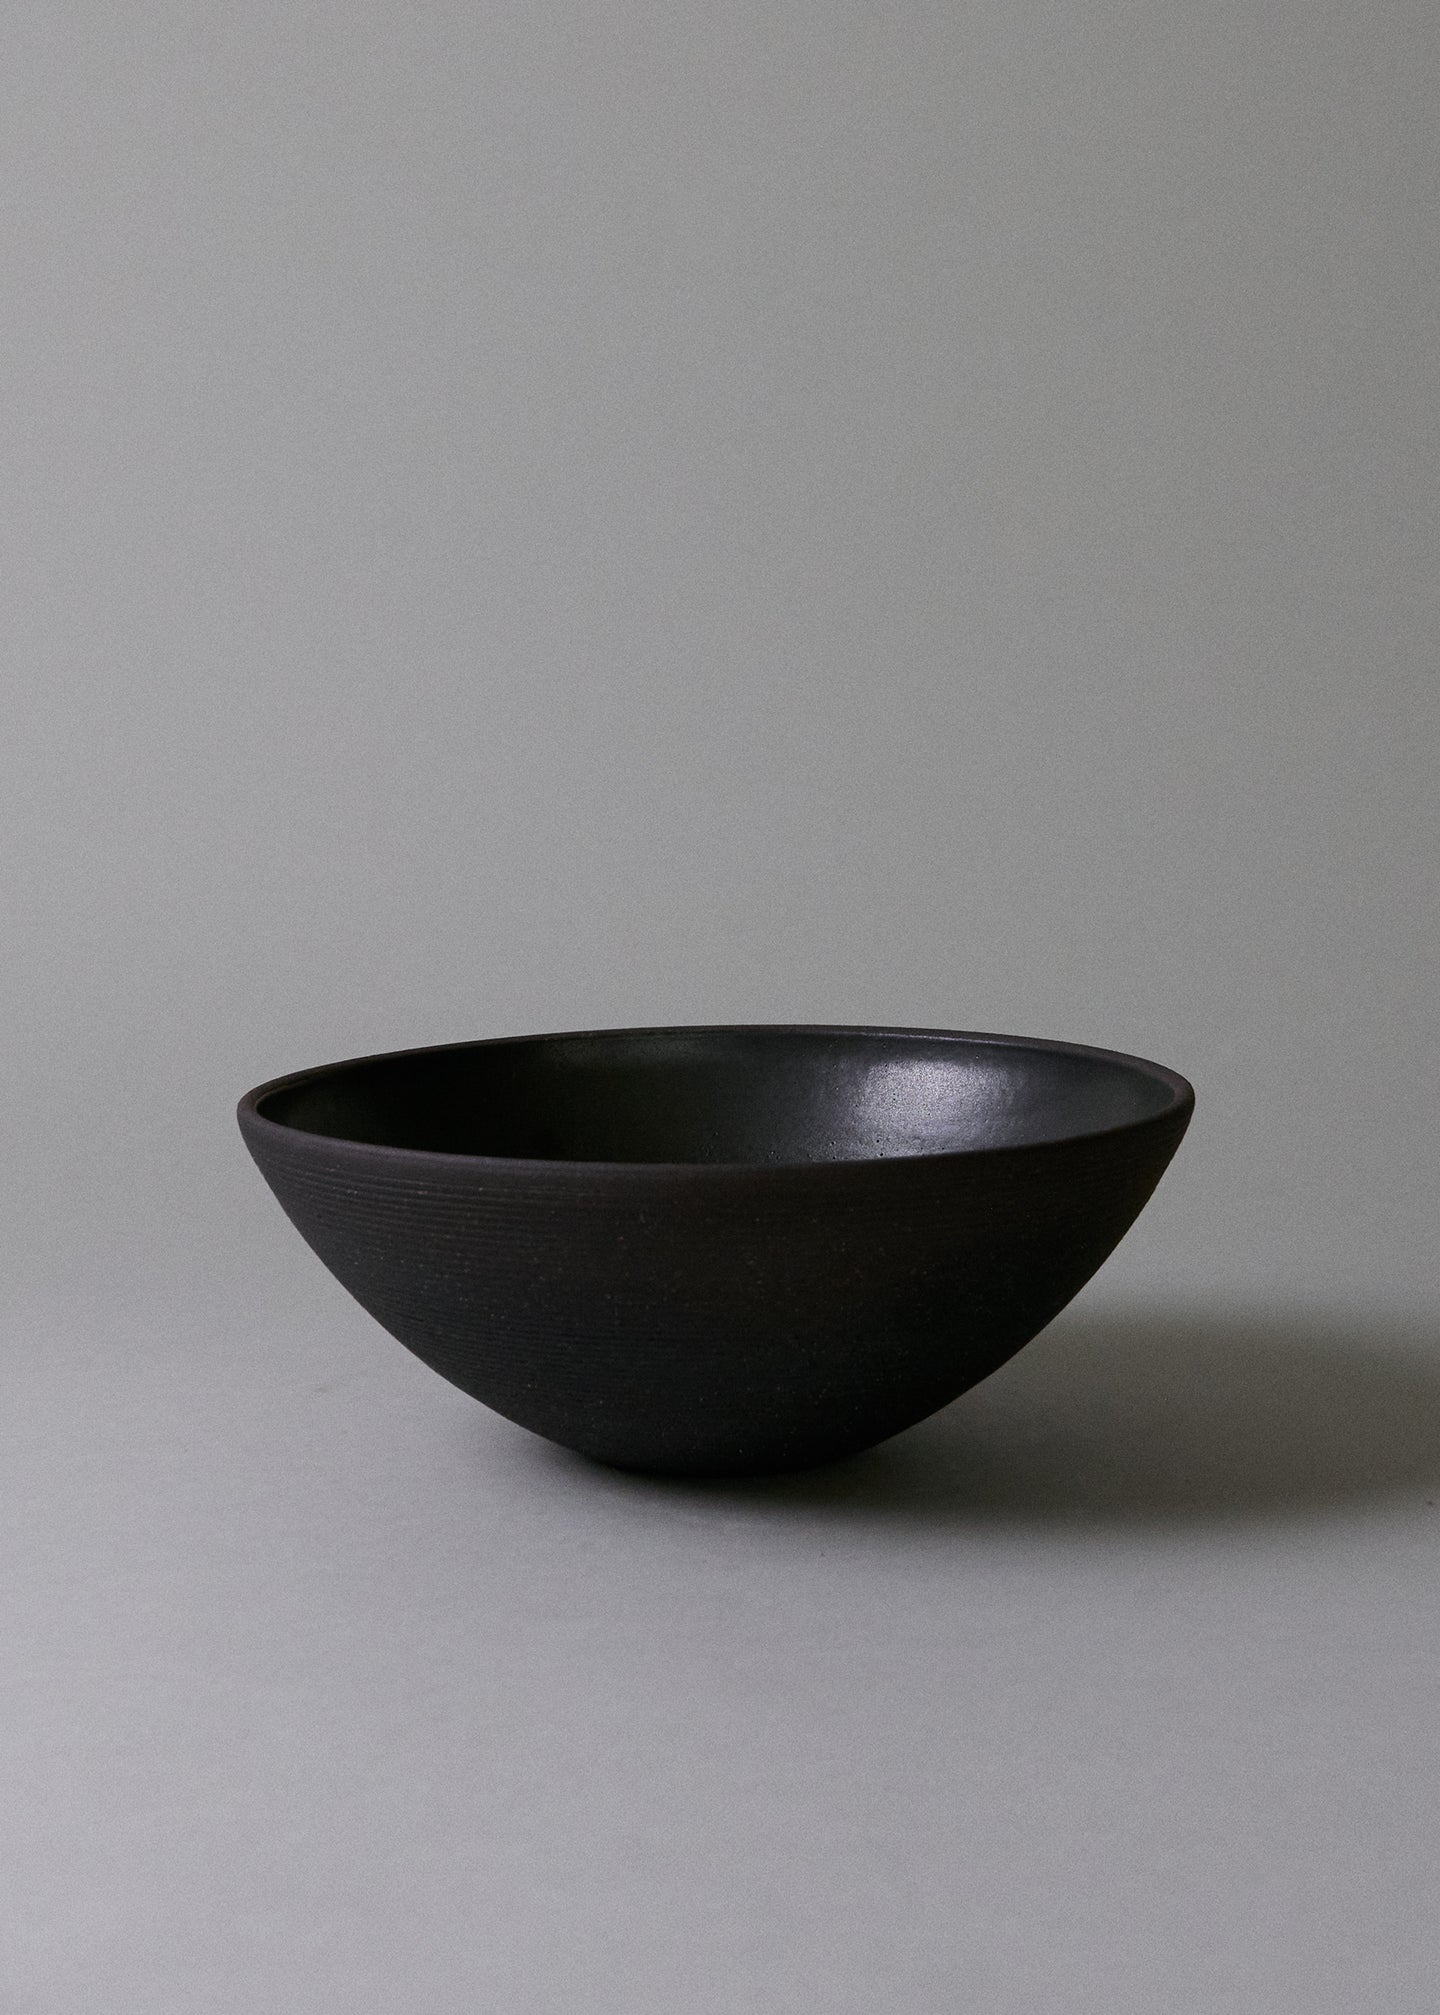 Essential Bowl in Combed Black Sand - Victoria Morris Pottery